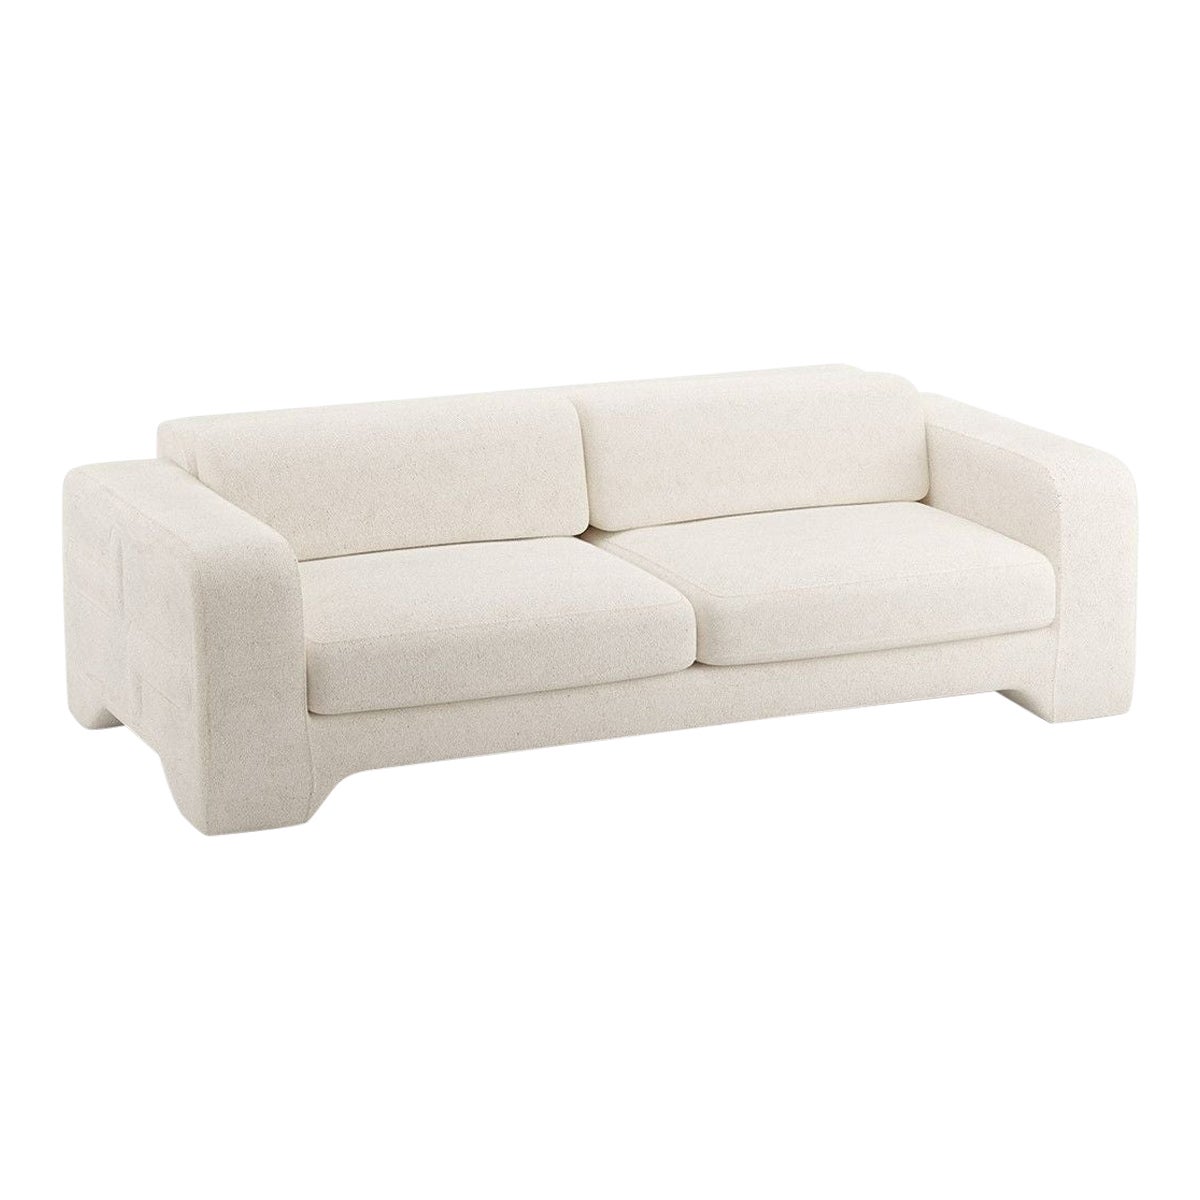 Popus Editions Giovanna 4 Seater Sofa in Egg Shell off White Malmoe Terry Fabric For Sale